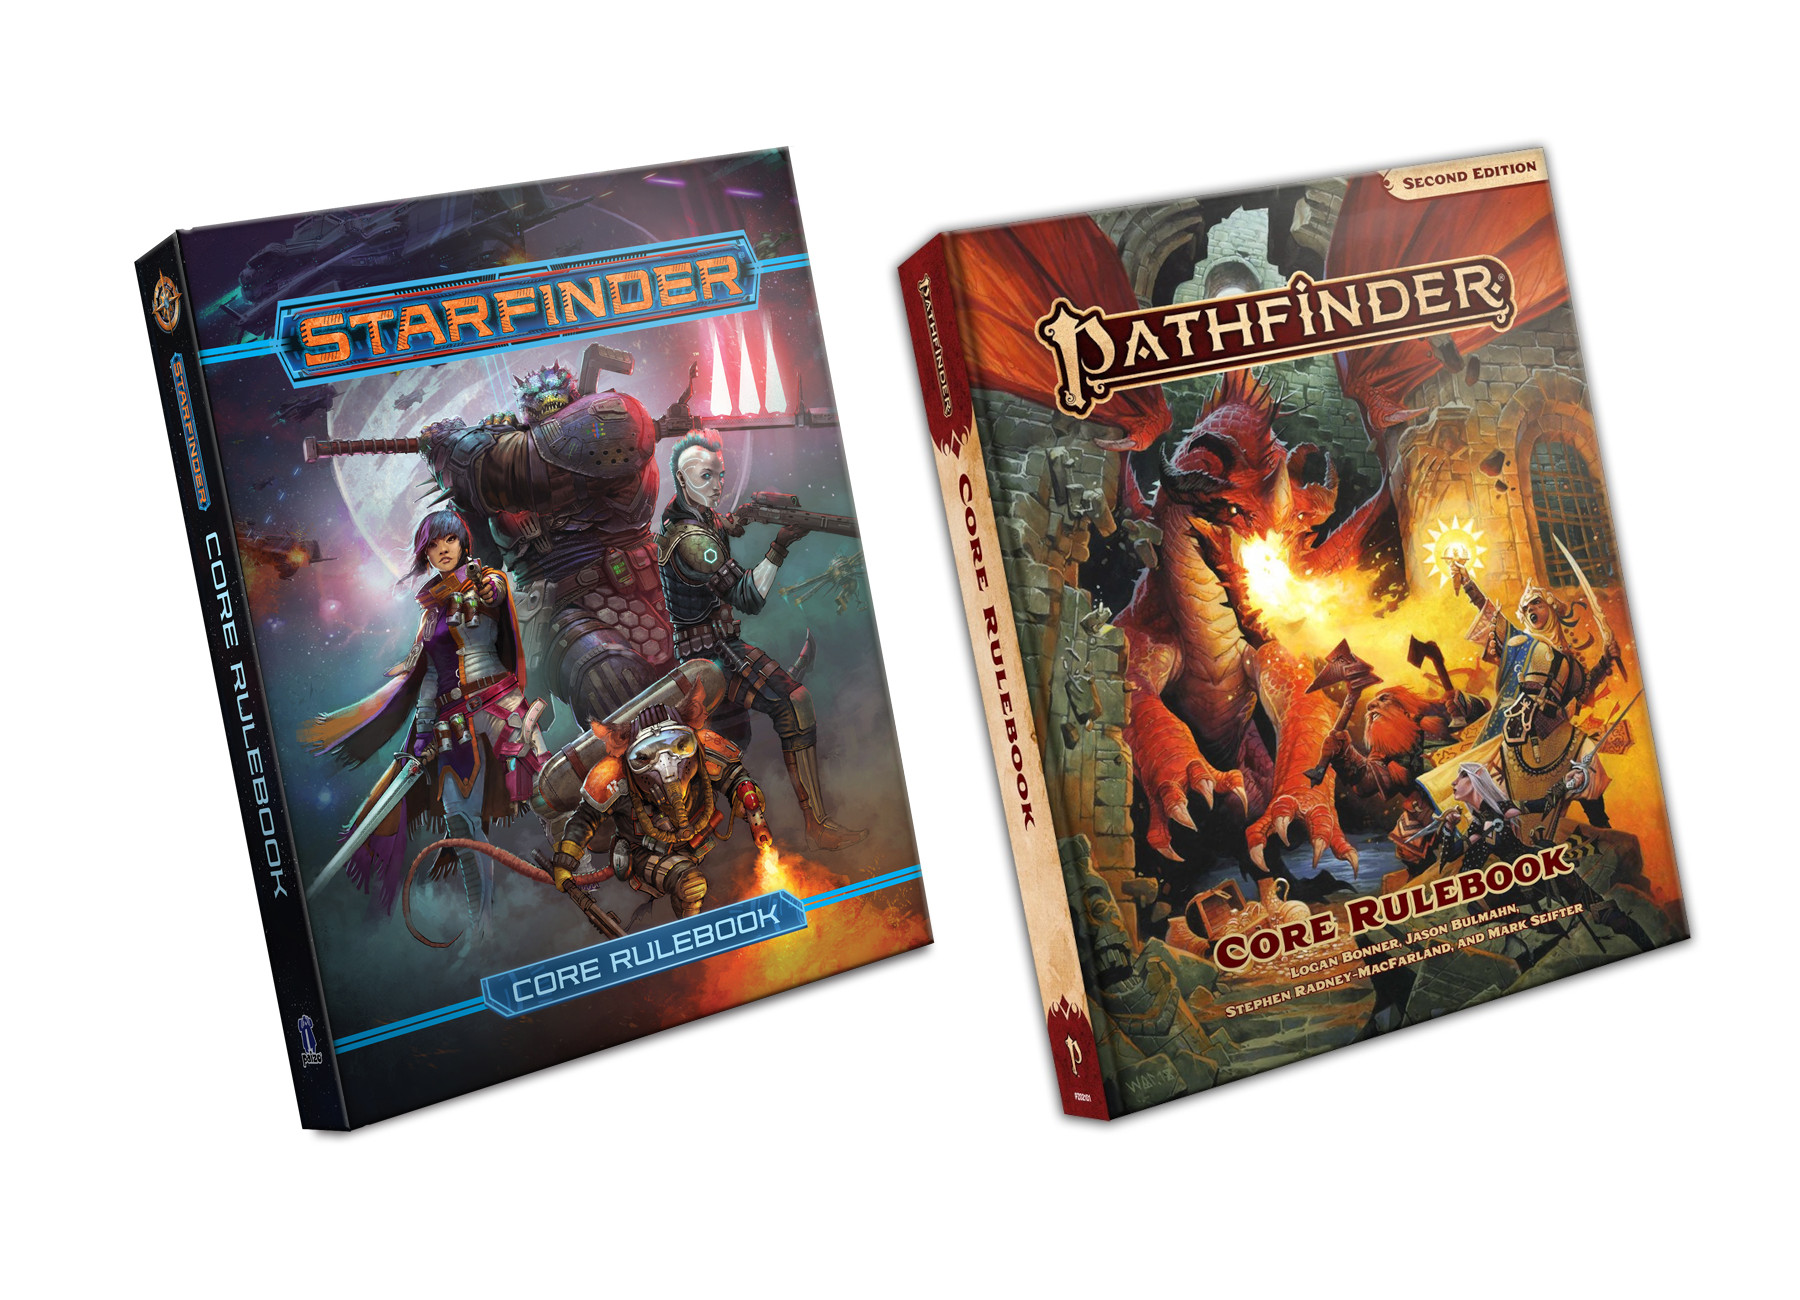 Pathfinder Second Edition Core Rulebook and Starfinder Core Rulebook Digital CD Key, 12.58$